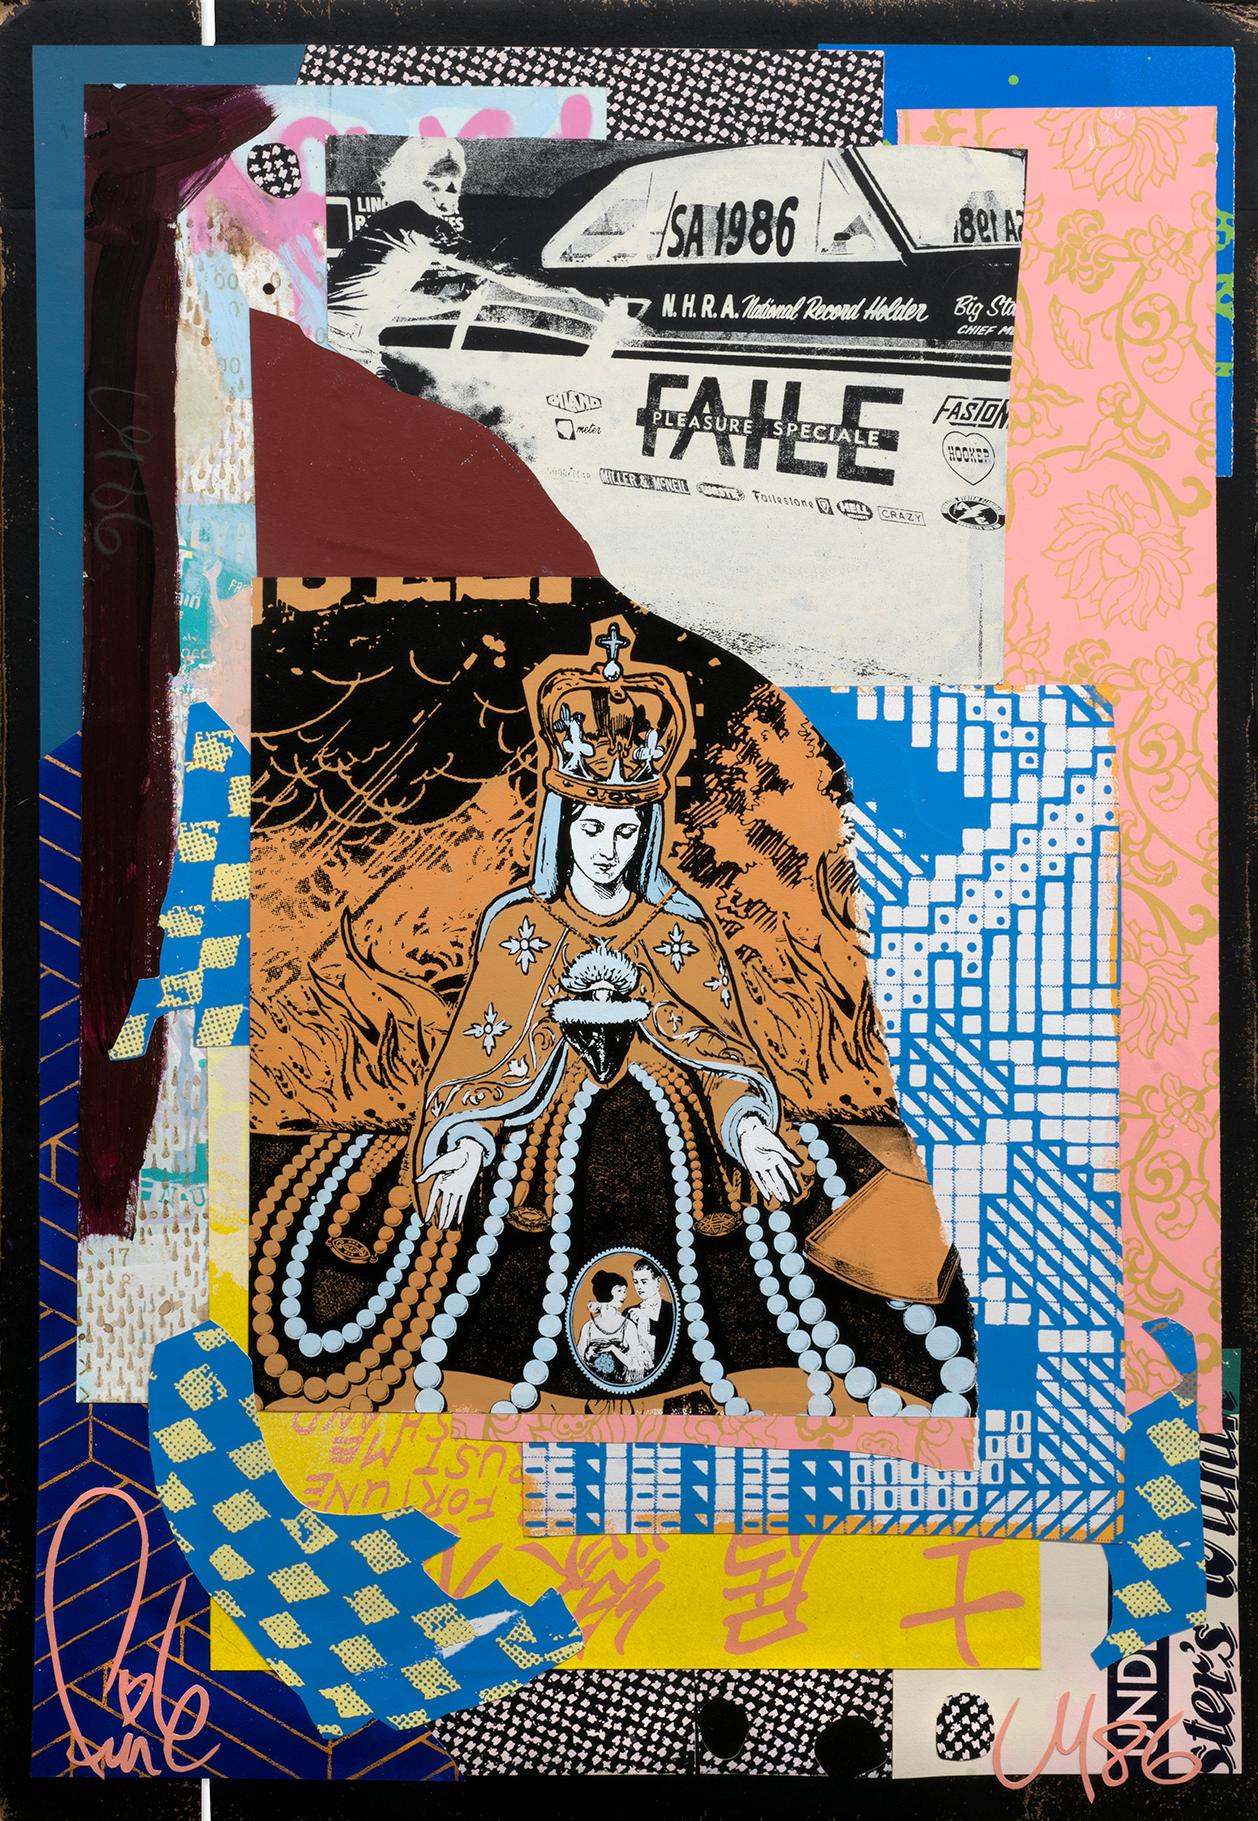 Original, unique artwork, 1/1.
Medium: Silkscreen ink and acrylic painting on paper.
Sold with the certificate of authenticity.

Biography:
FAILE is the Brooklyn-based artistic collaboration between Patrick McNeil and Patrick Miller.
Their name is